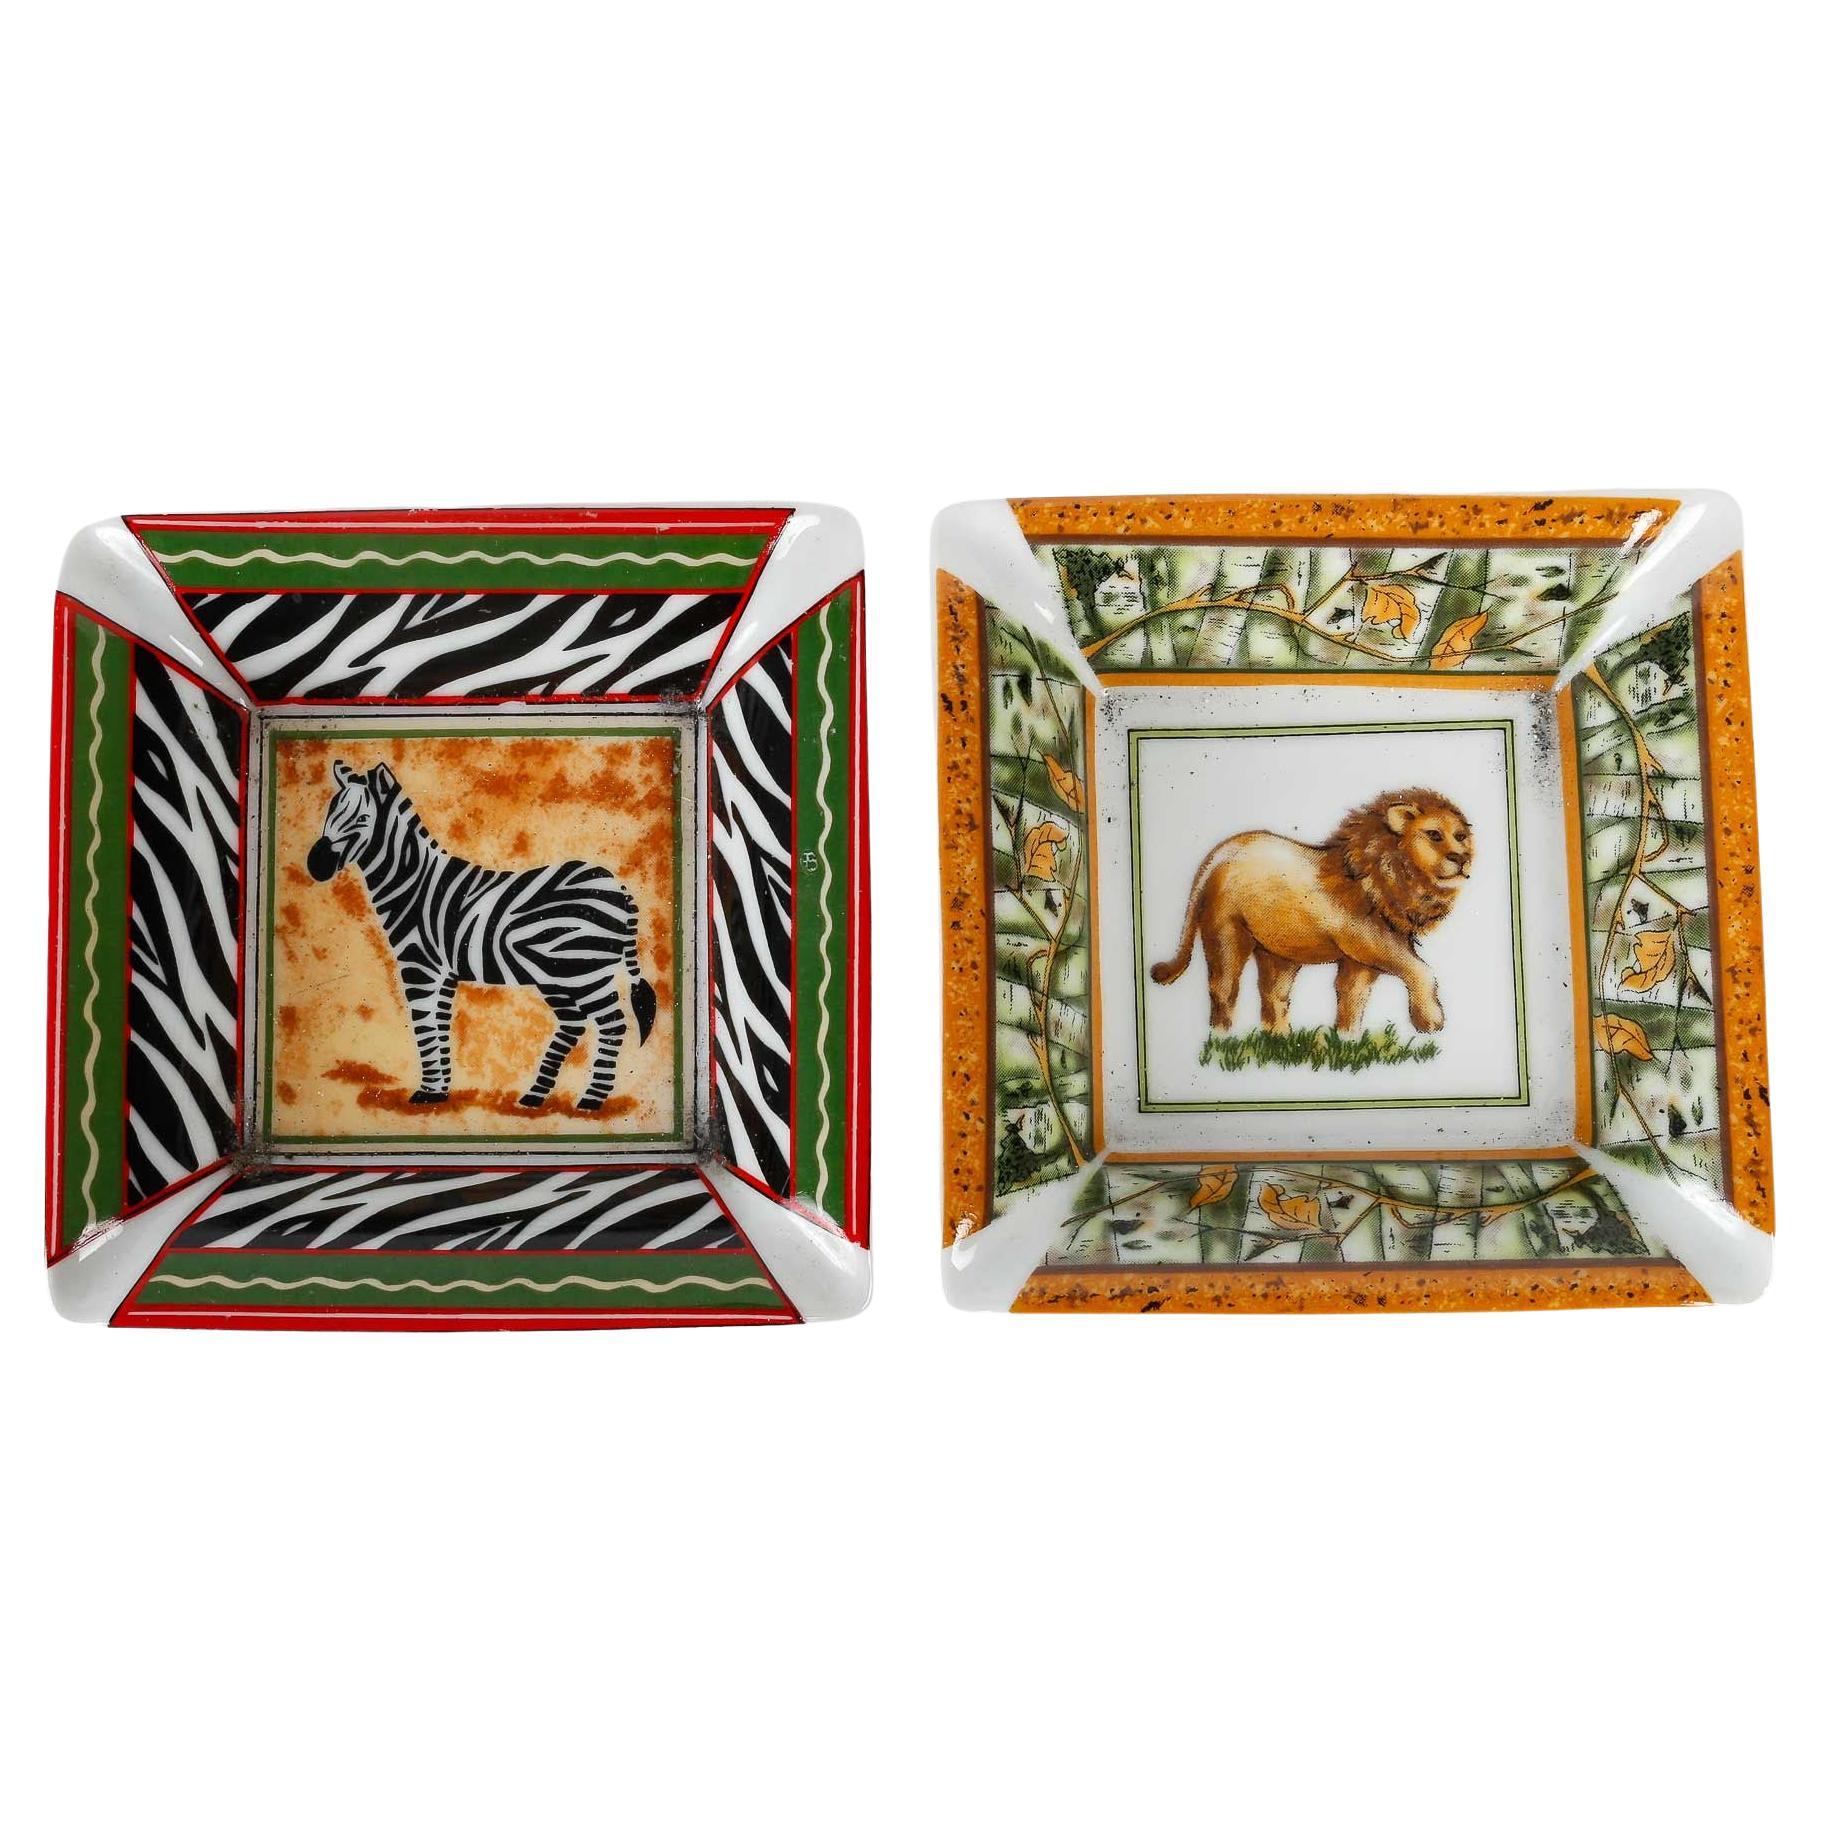 2 Ashtrays with Animal Motifs, Painted Porcelain.